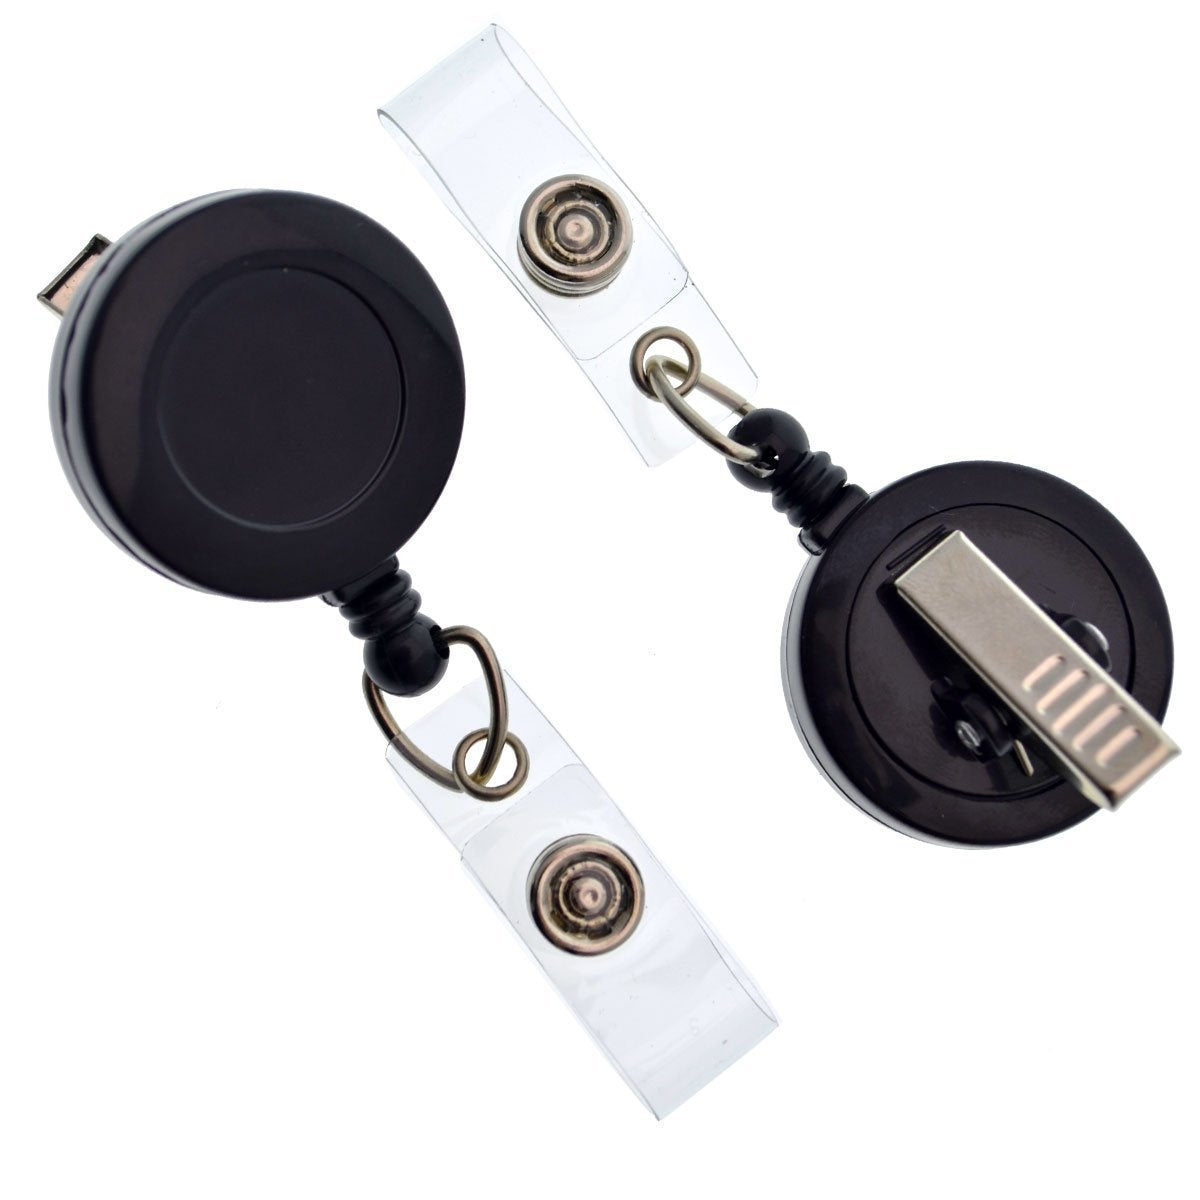  I'm Really a Fungi - Retractable Badge Reel with Swivel Clip  and Extra-Long 34 inch Cord - Badge Holder/Murse/Male Nurse/RN/Funny  Badge/Mushroom : Office Products